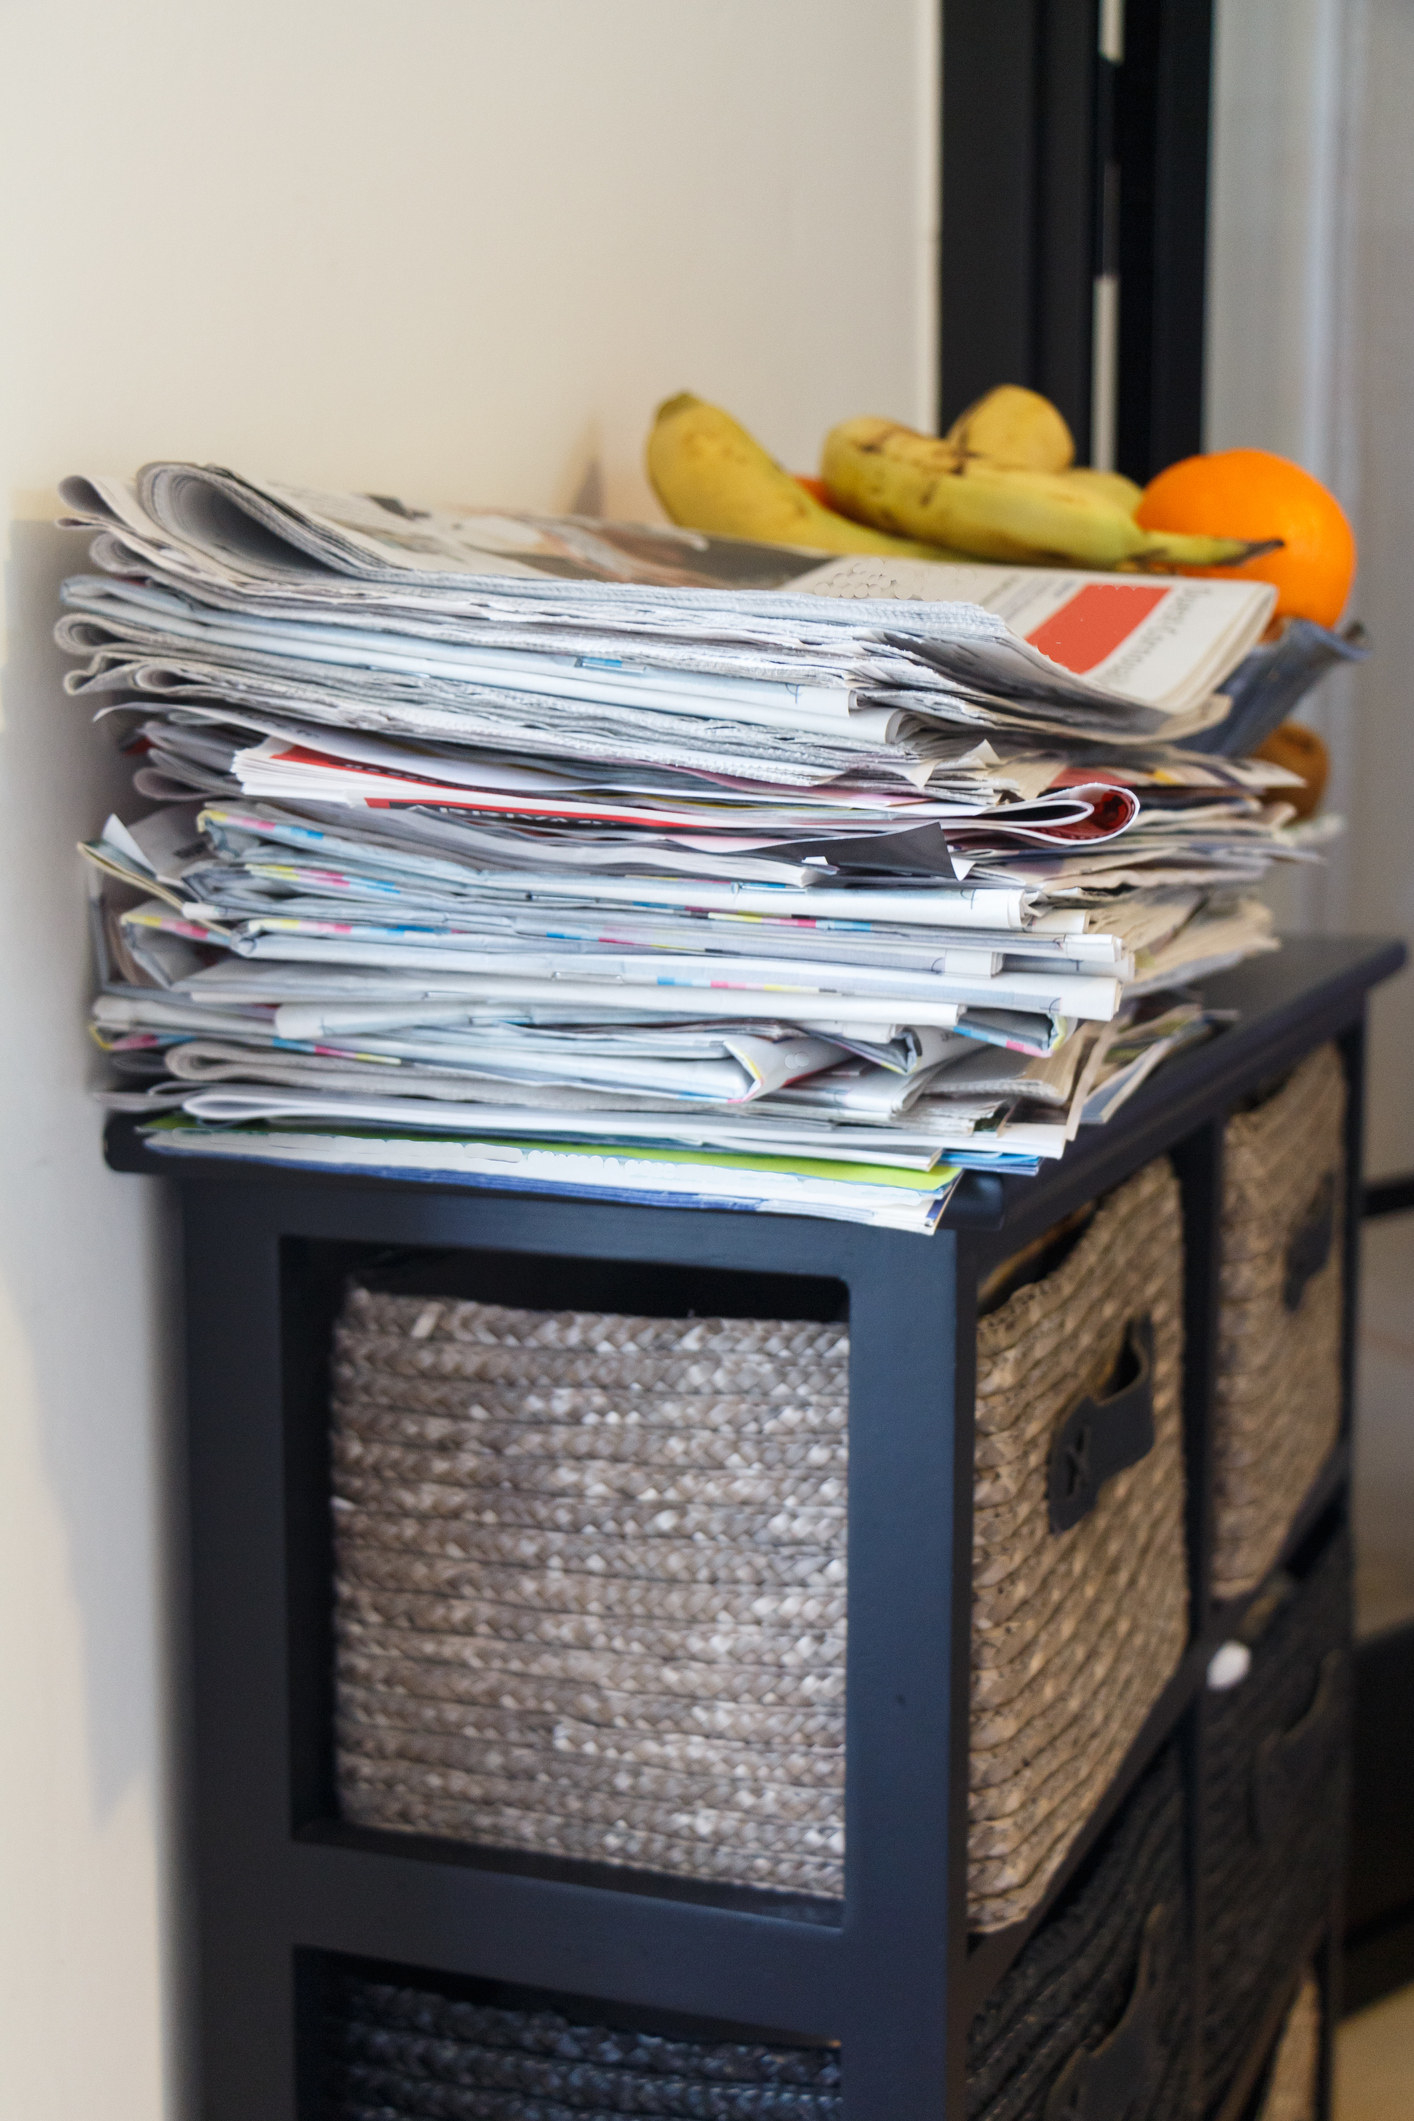 A stack of newspapers, topped by bananas, atop pullout drawers